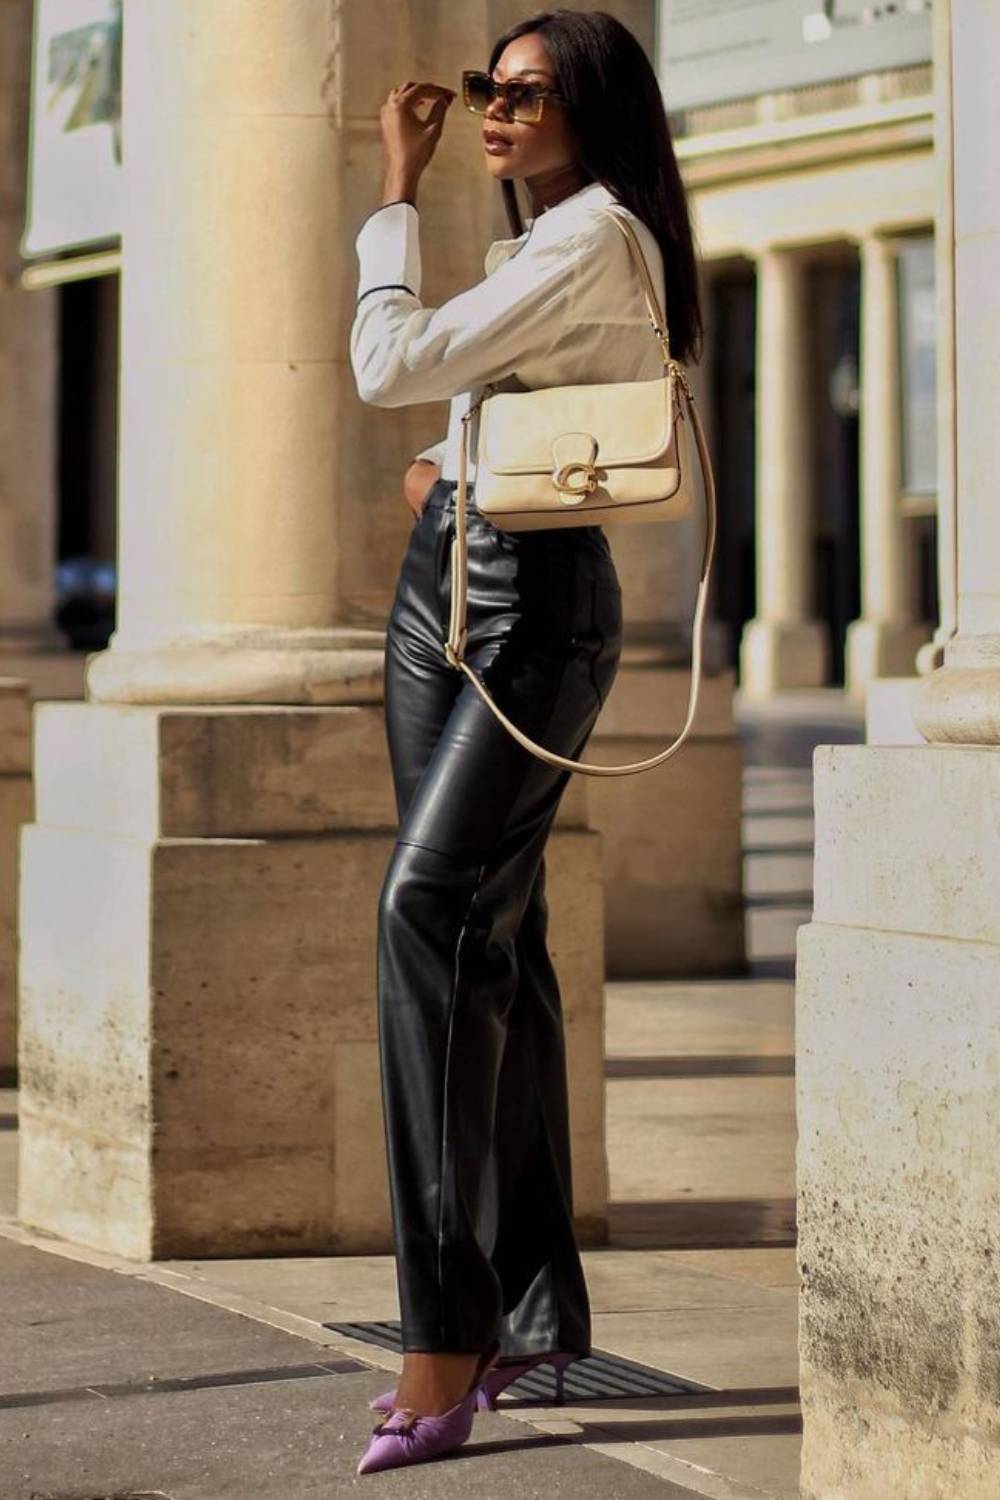 Andrea Mun wearing white top and leather trousers with heels